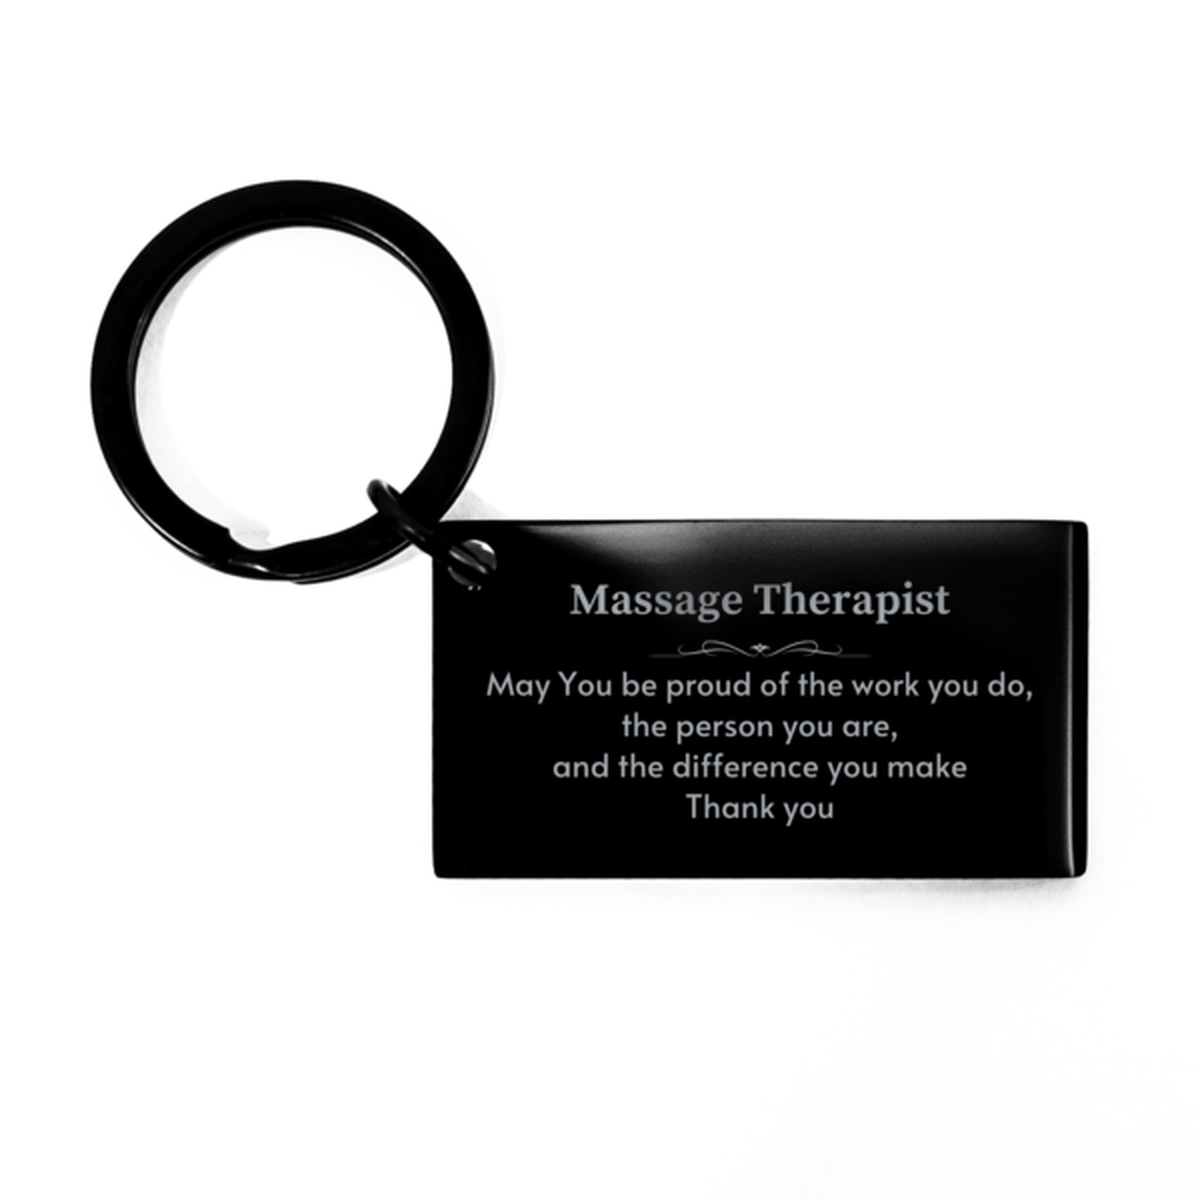 Heartwarming Keychain Retirement Coworkers Gifts for Massage Therapist, Oil Worker May You be proud of the work you do, the person you are Gifts for Boss Men Women Friends